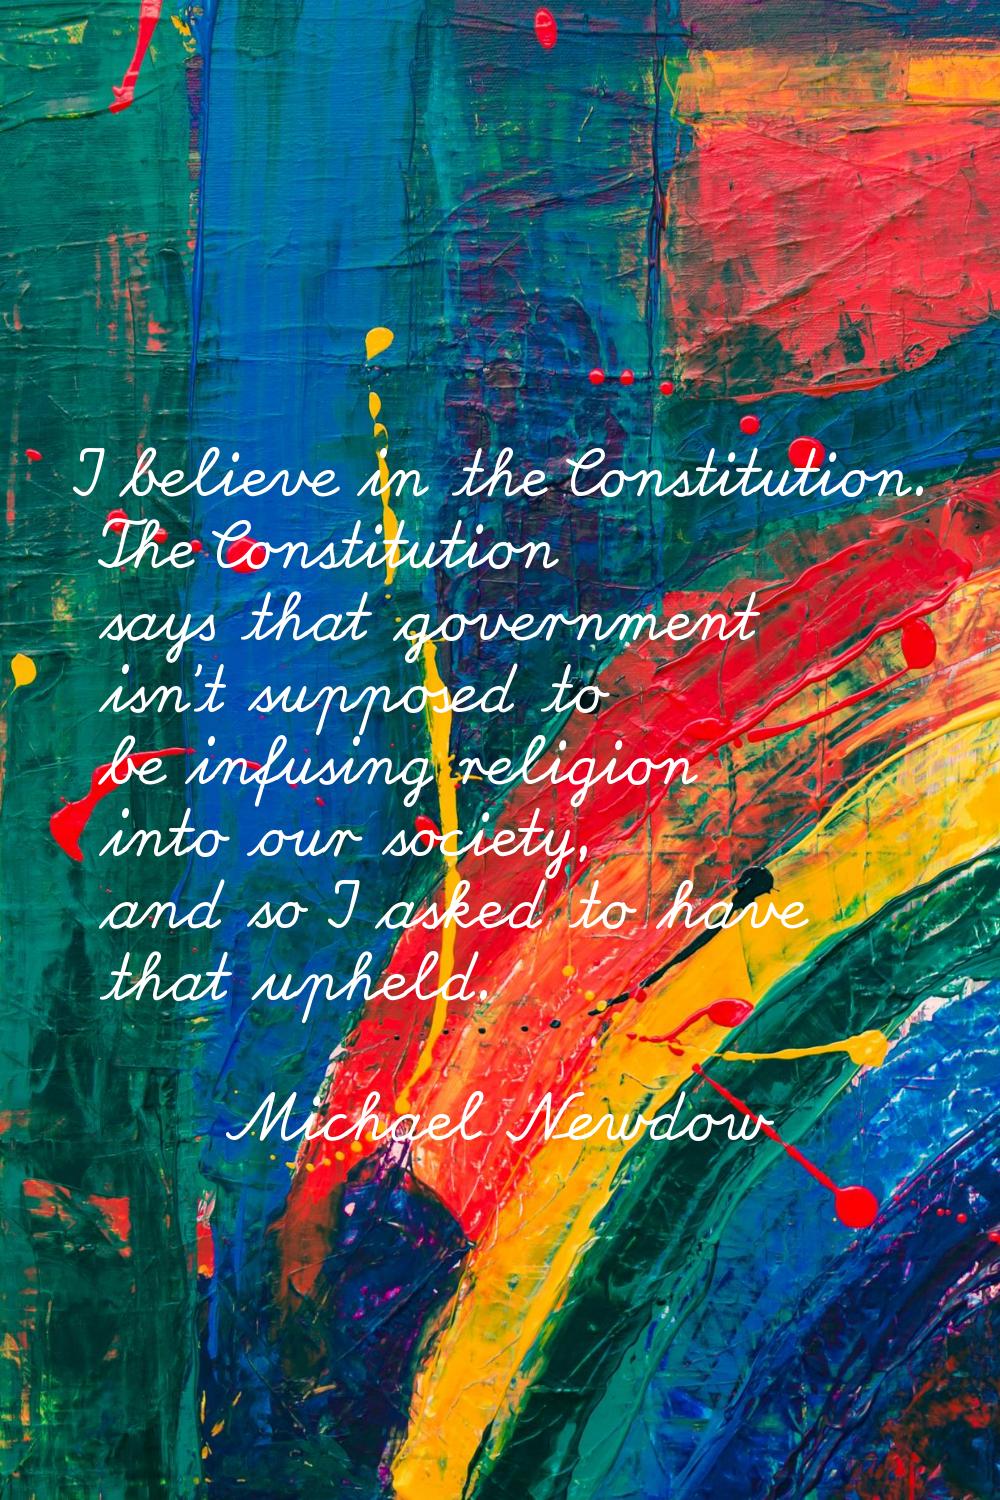 I believe in the Constitution. The Constitution says that government isn't supposed to be infusing 